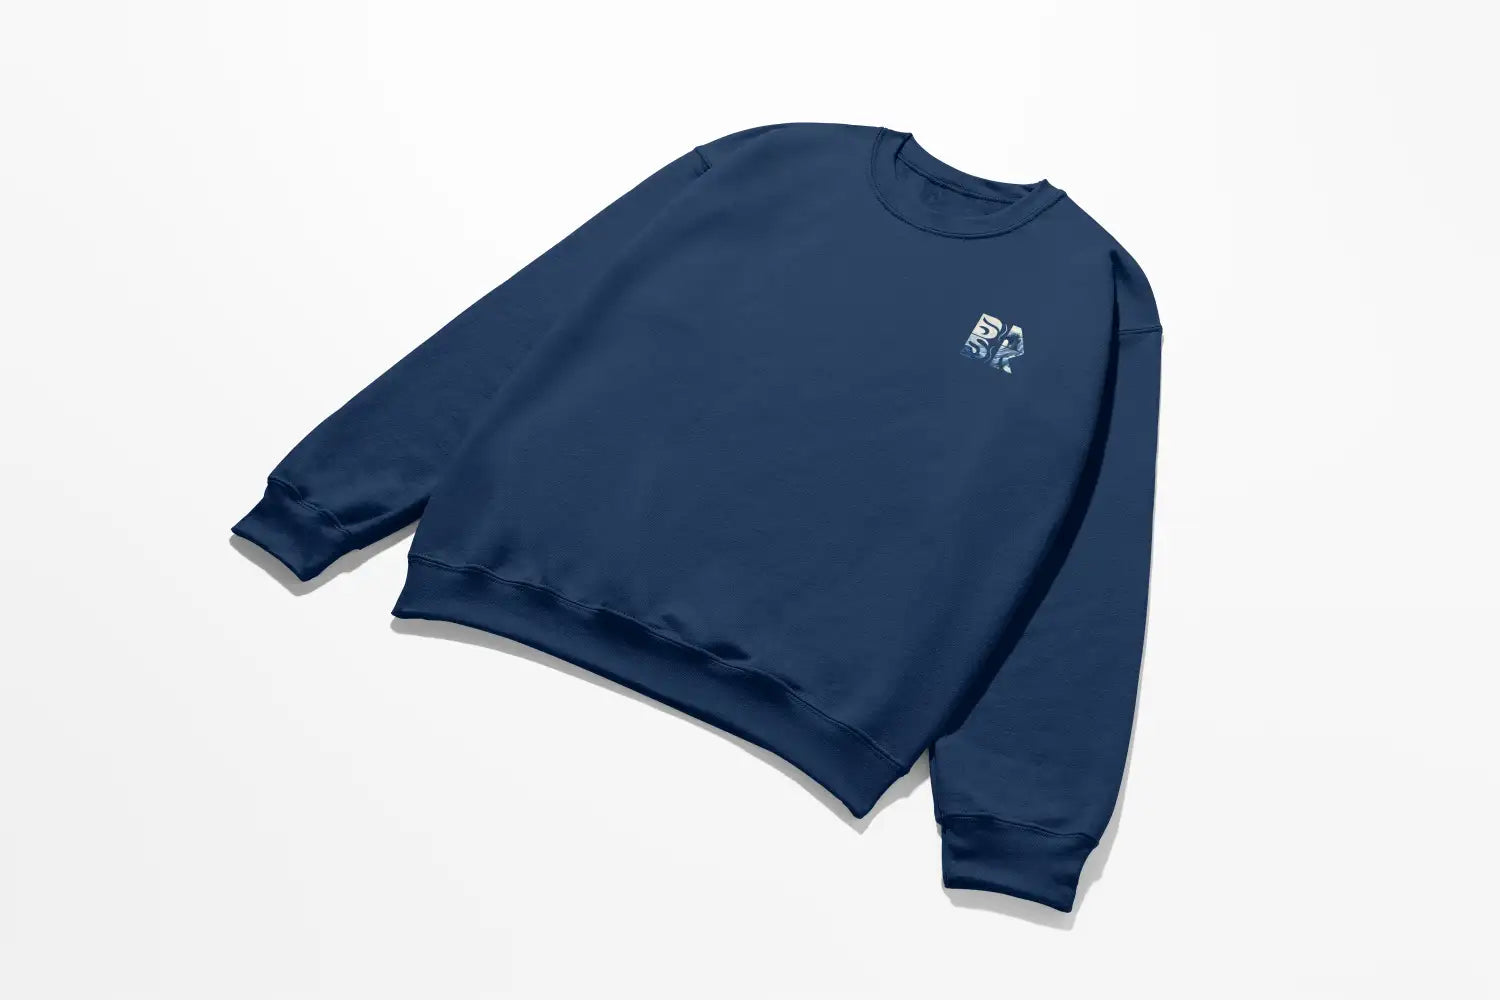 A Peace Be Still Sweatshirt with the Be Still and Know logo on it.